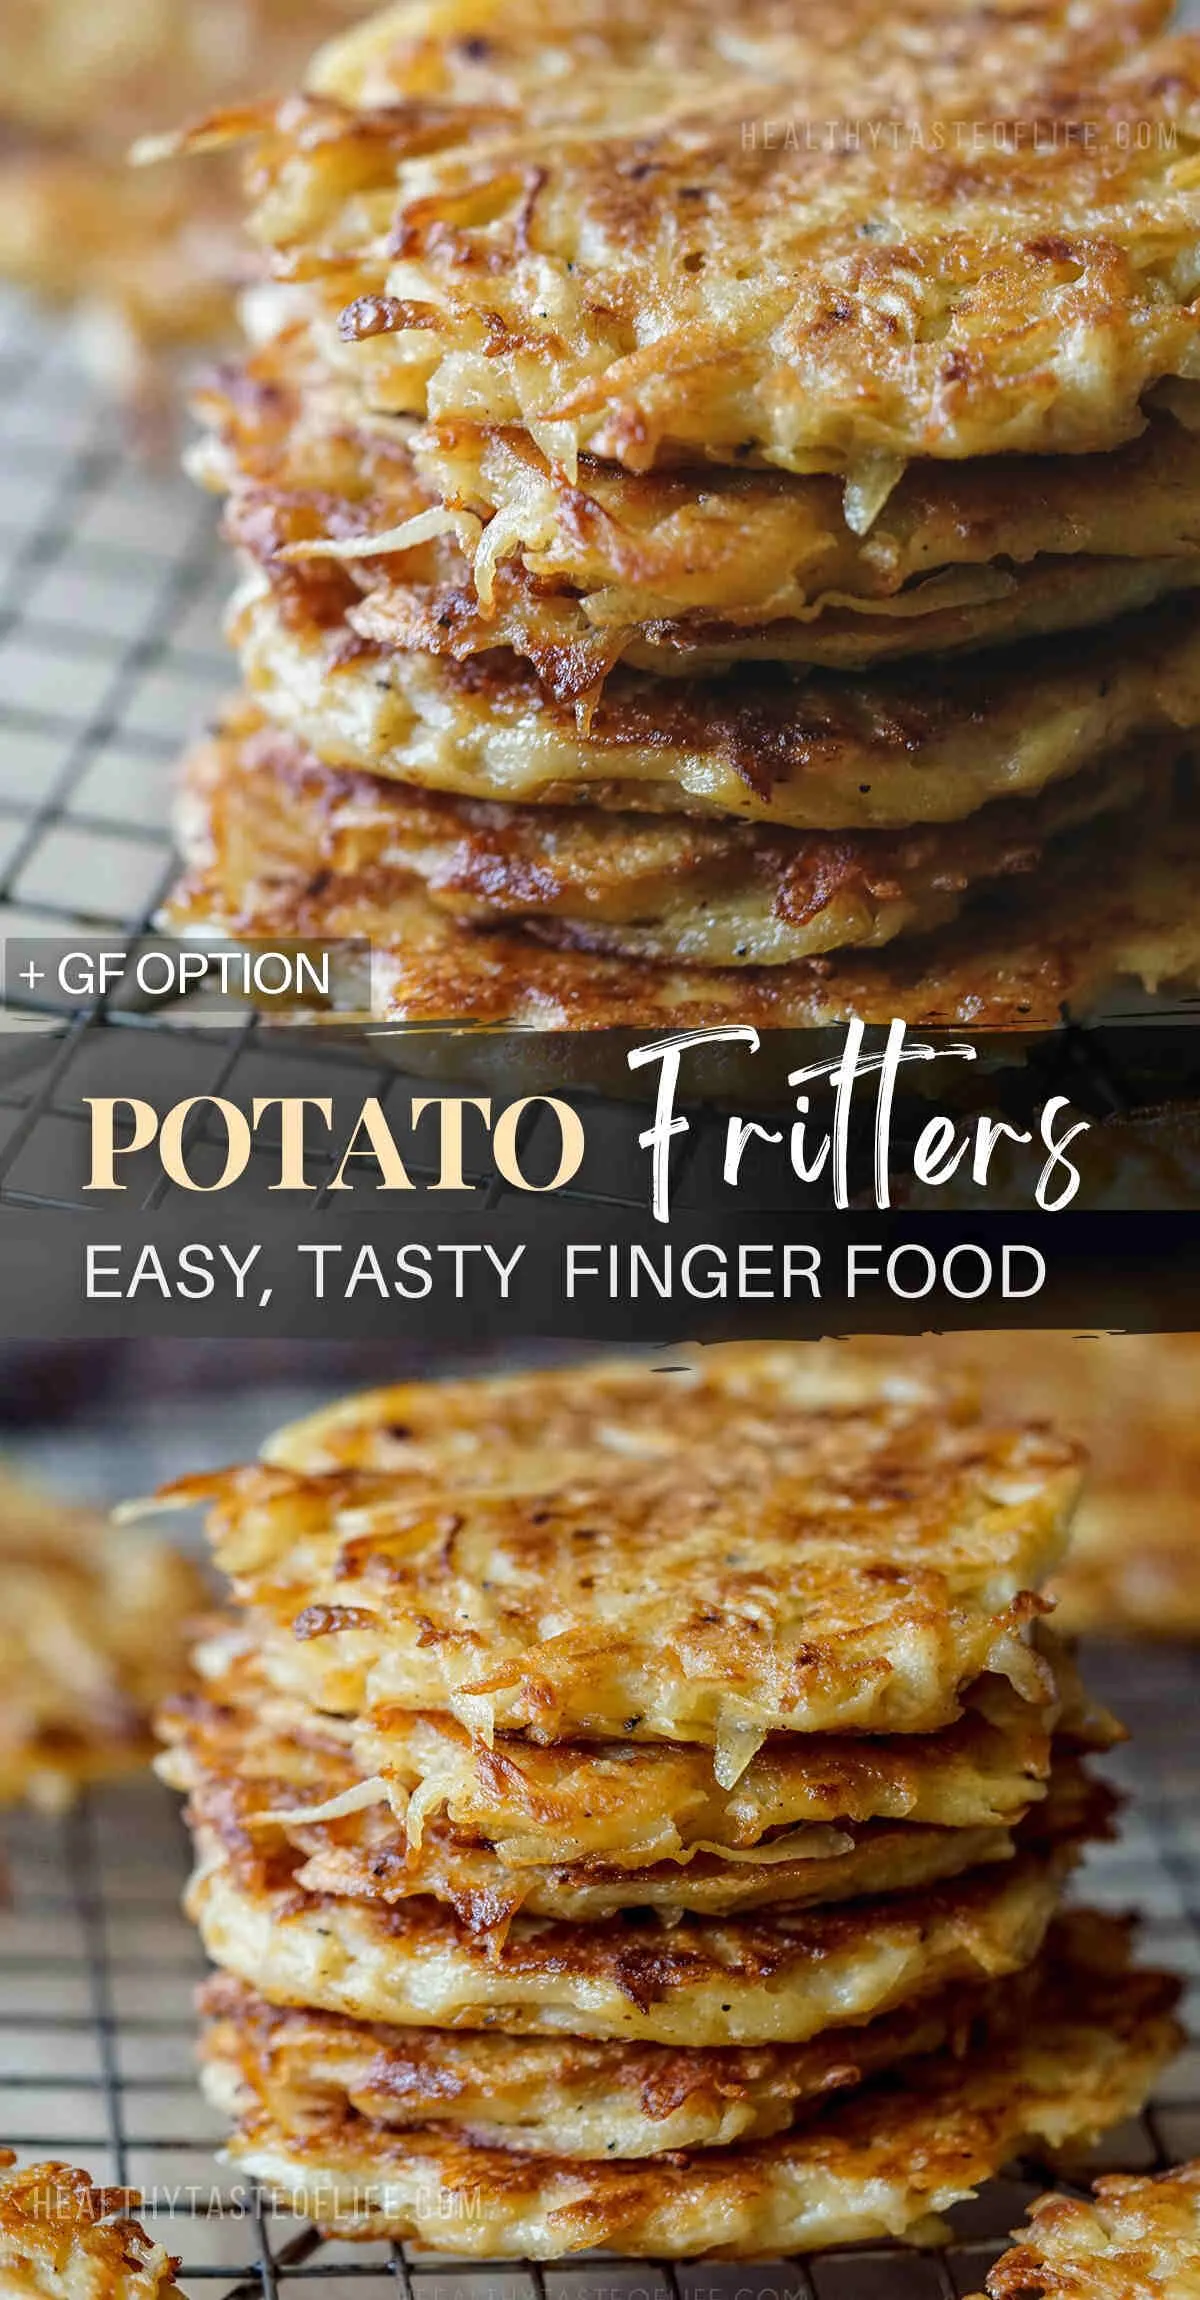 Simple yet flavorful potato fritters recipe made from freshly grated potatoes bound together with flour and eggs, and elevated with special seasoning. Shallow-fried to achieve an irresistible crispy golden-brown texture, these potato fritters are the perfect vegetarian side dish or pairing for a wholesome meal. Discover why these healthy potato patties are one of the most popular recipes now! #potatofritters #potato #fritters #patties #potatocakes #recipe #fingerfood